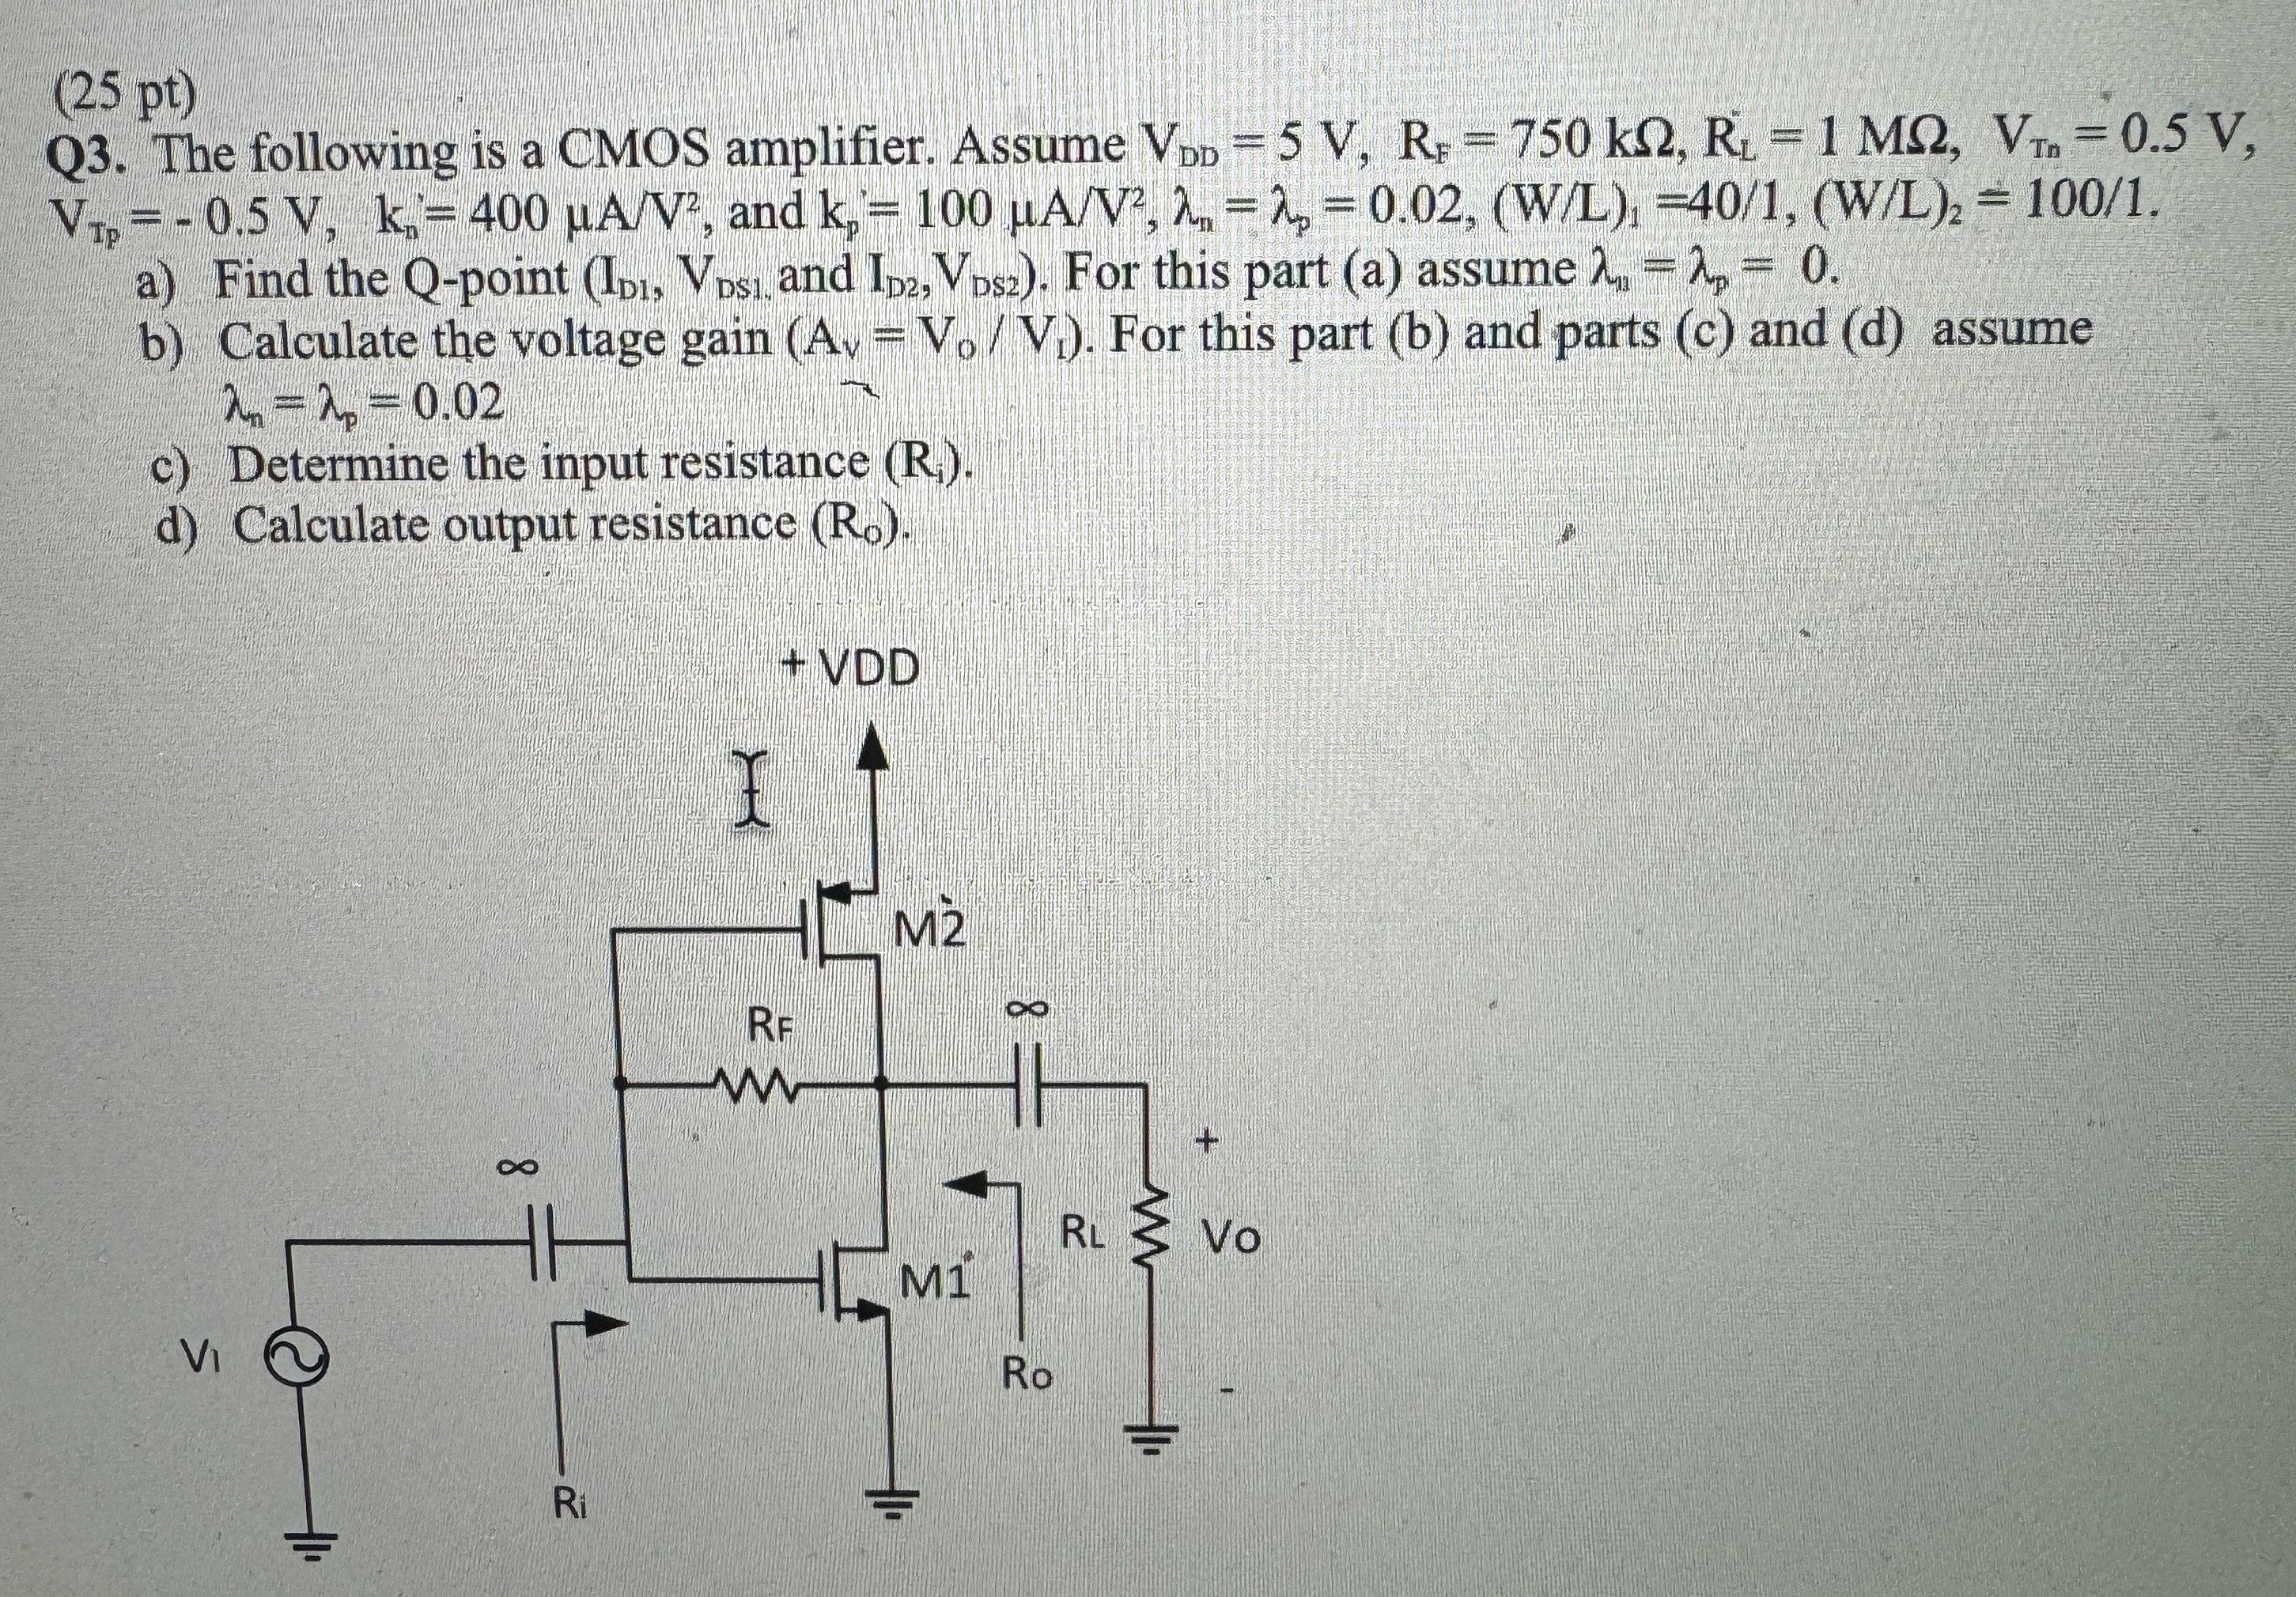 (25 pt) Q3. The following is a CMOS amplifier. Assume VDD = 5 V, RF = 750 kΩ, RL = 1 MΩ, VTn = 0.5 V, VTP = -0.5 V, kn = 400 μA/V2, and kp = 100 μA/V2, λn = λp = 0.02, (W/L)1 = 40 /1, (W/L)2 = 100 /1. a) Find the Q-point (ID1, VDS1, and ID2, VDS2). For this part (a) assume λn = λp = 0. b) Calculate the voltage gain (Av = Vo/Vt). For this part (b) and parts (c) and (d) assume λn = λp = 0.02 c) Determine the input resistance (Ri). d) Calculate output resistance (R0). 